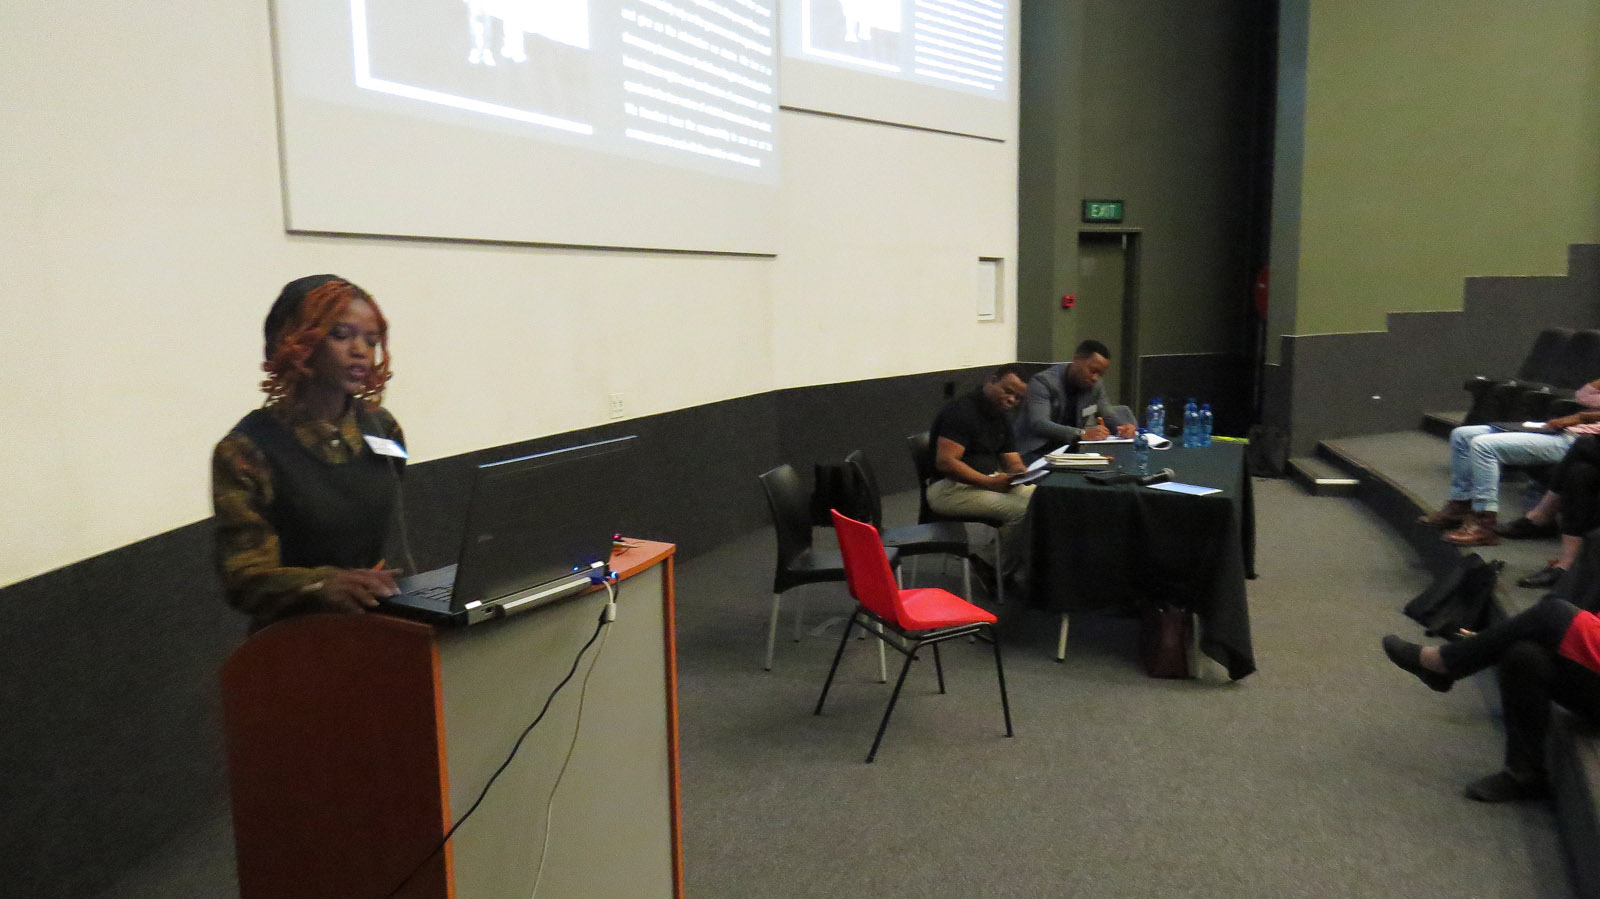 Click the image for a view of: Nonkululeko Chabalala speaking at the roundtable: South African book arts as a democratic force. Sunday 26 March